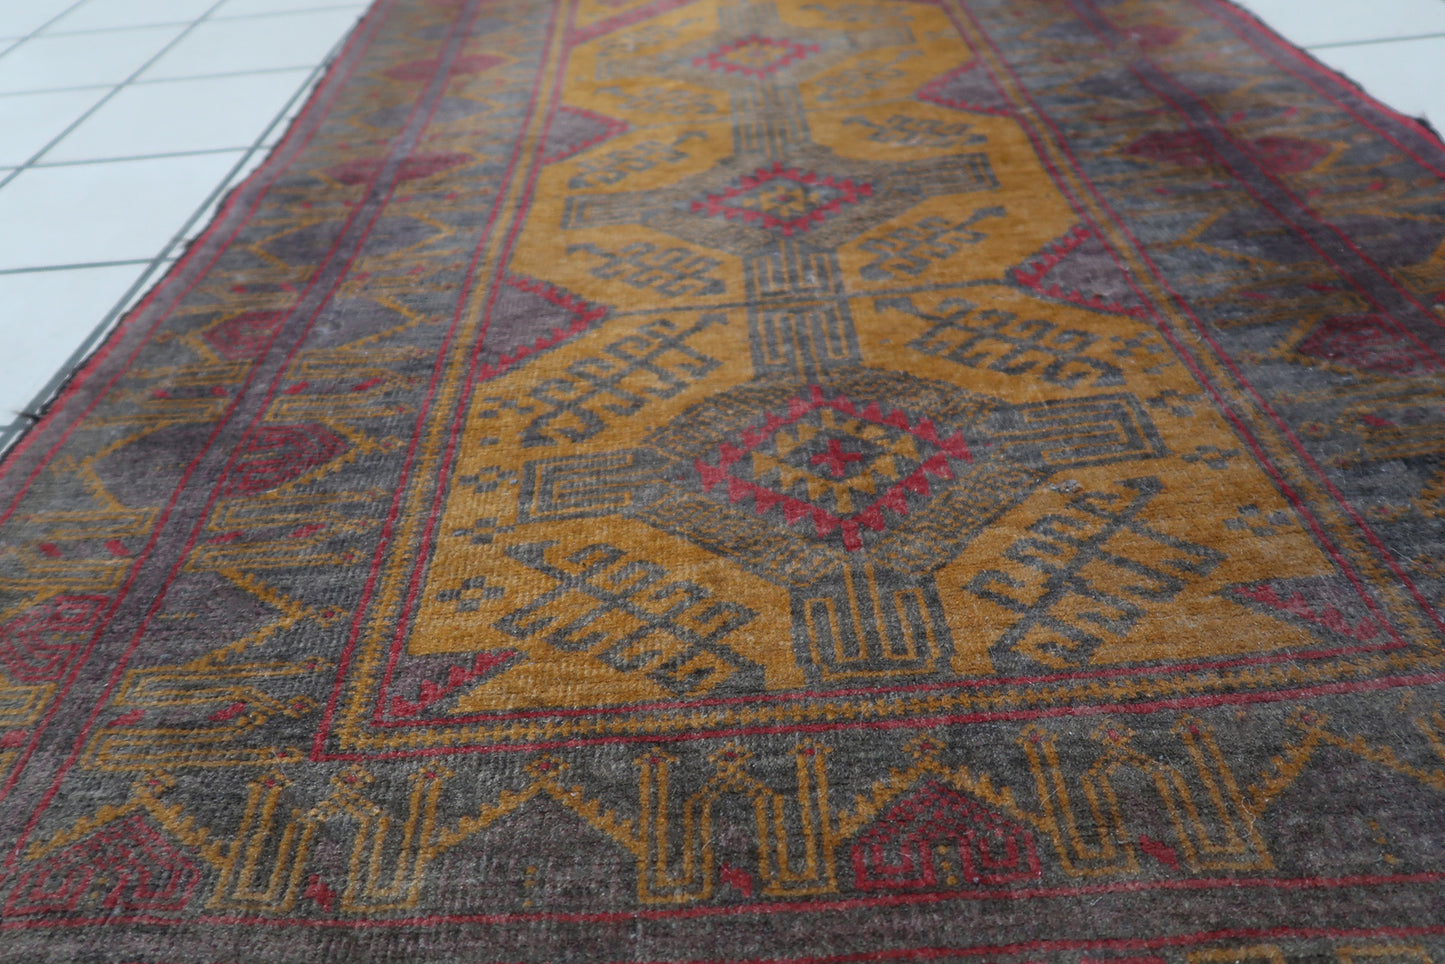 Intricate weaving and texture of the wool material on the Afghan Baluch rug